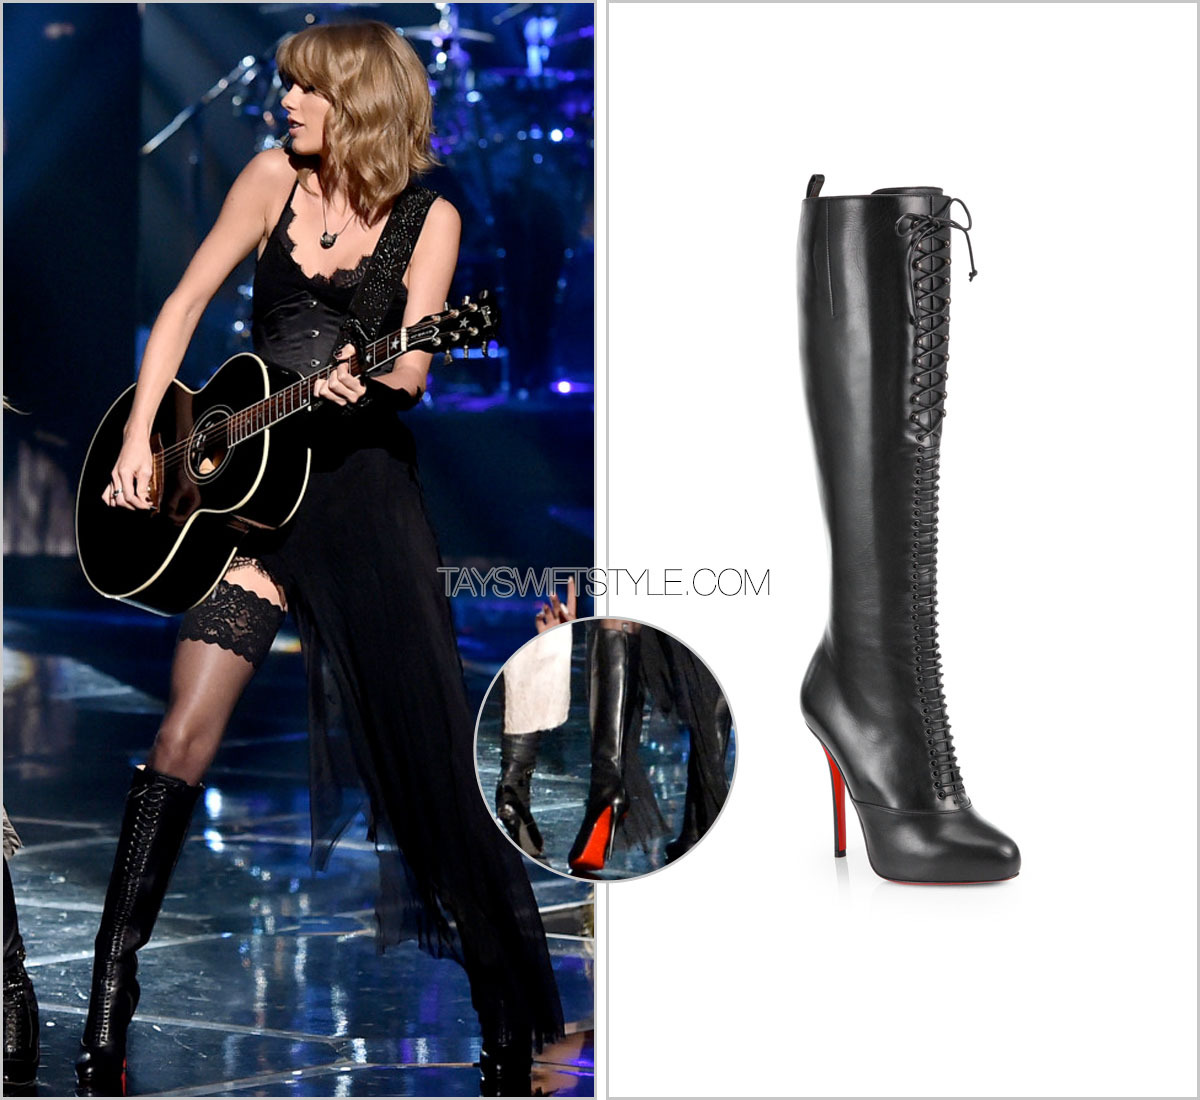 Taylor Swift Style — Performing “Ghost Town” with Madonna